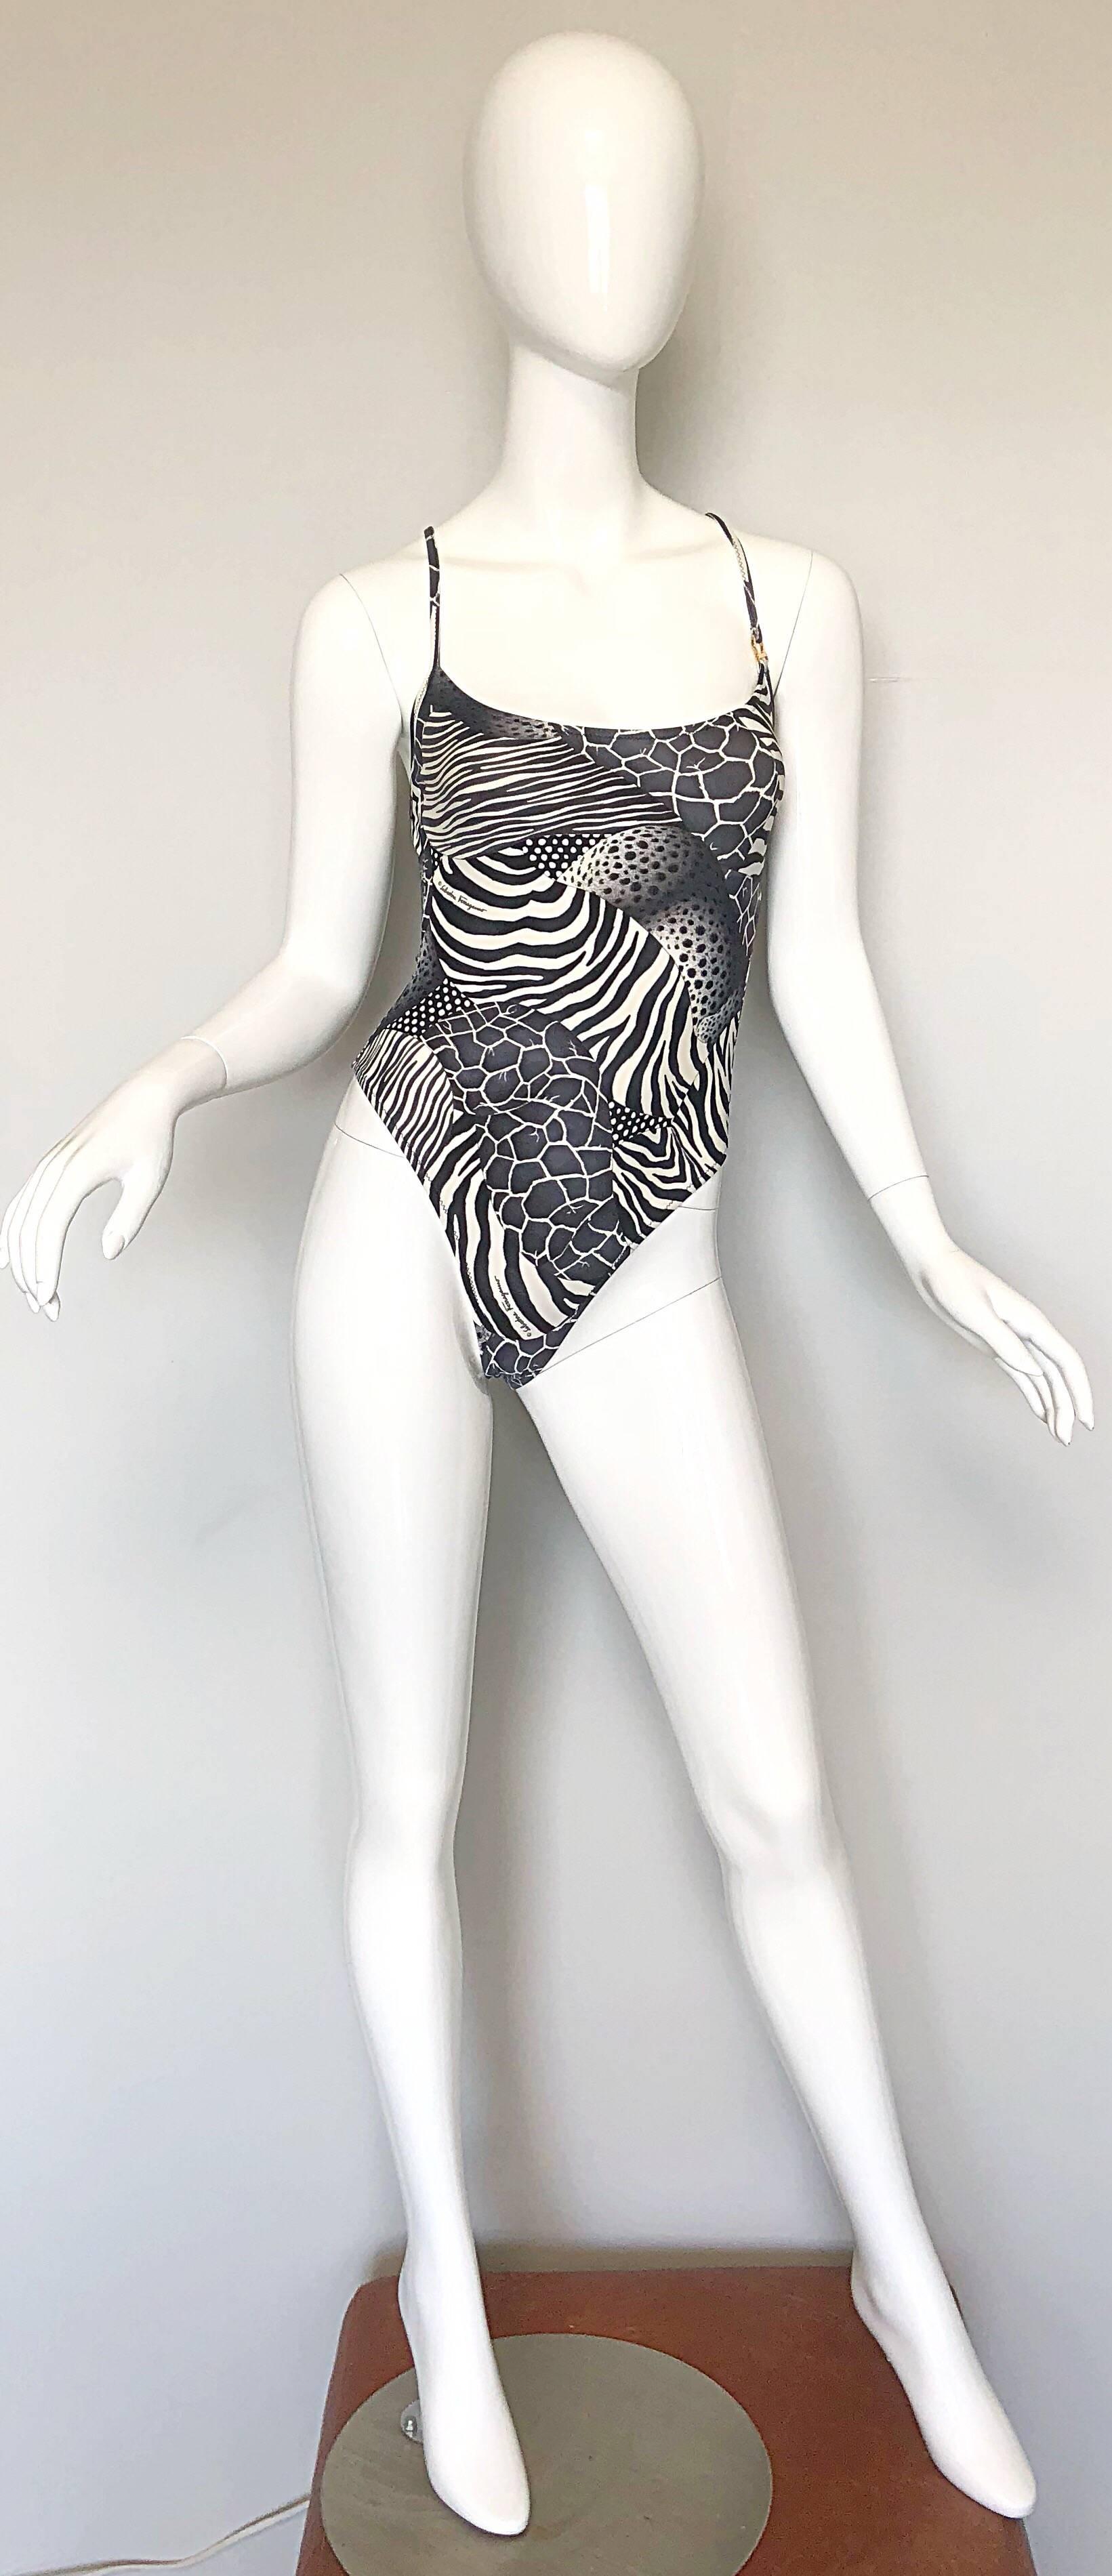 Sexy, yet classic 90s SALVATORE FERRAGOMO black and white animal print one piece swimsuit OR bodysuit! Features chic print of leopard, zebra and giraffe throughout. Signature gold Ferragomo embossed horsebit at left front strap. Sexy low cut back.